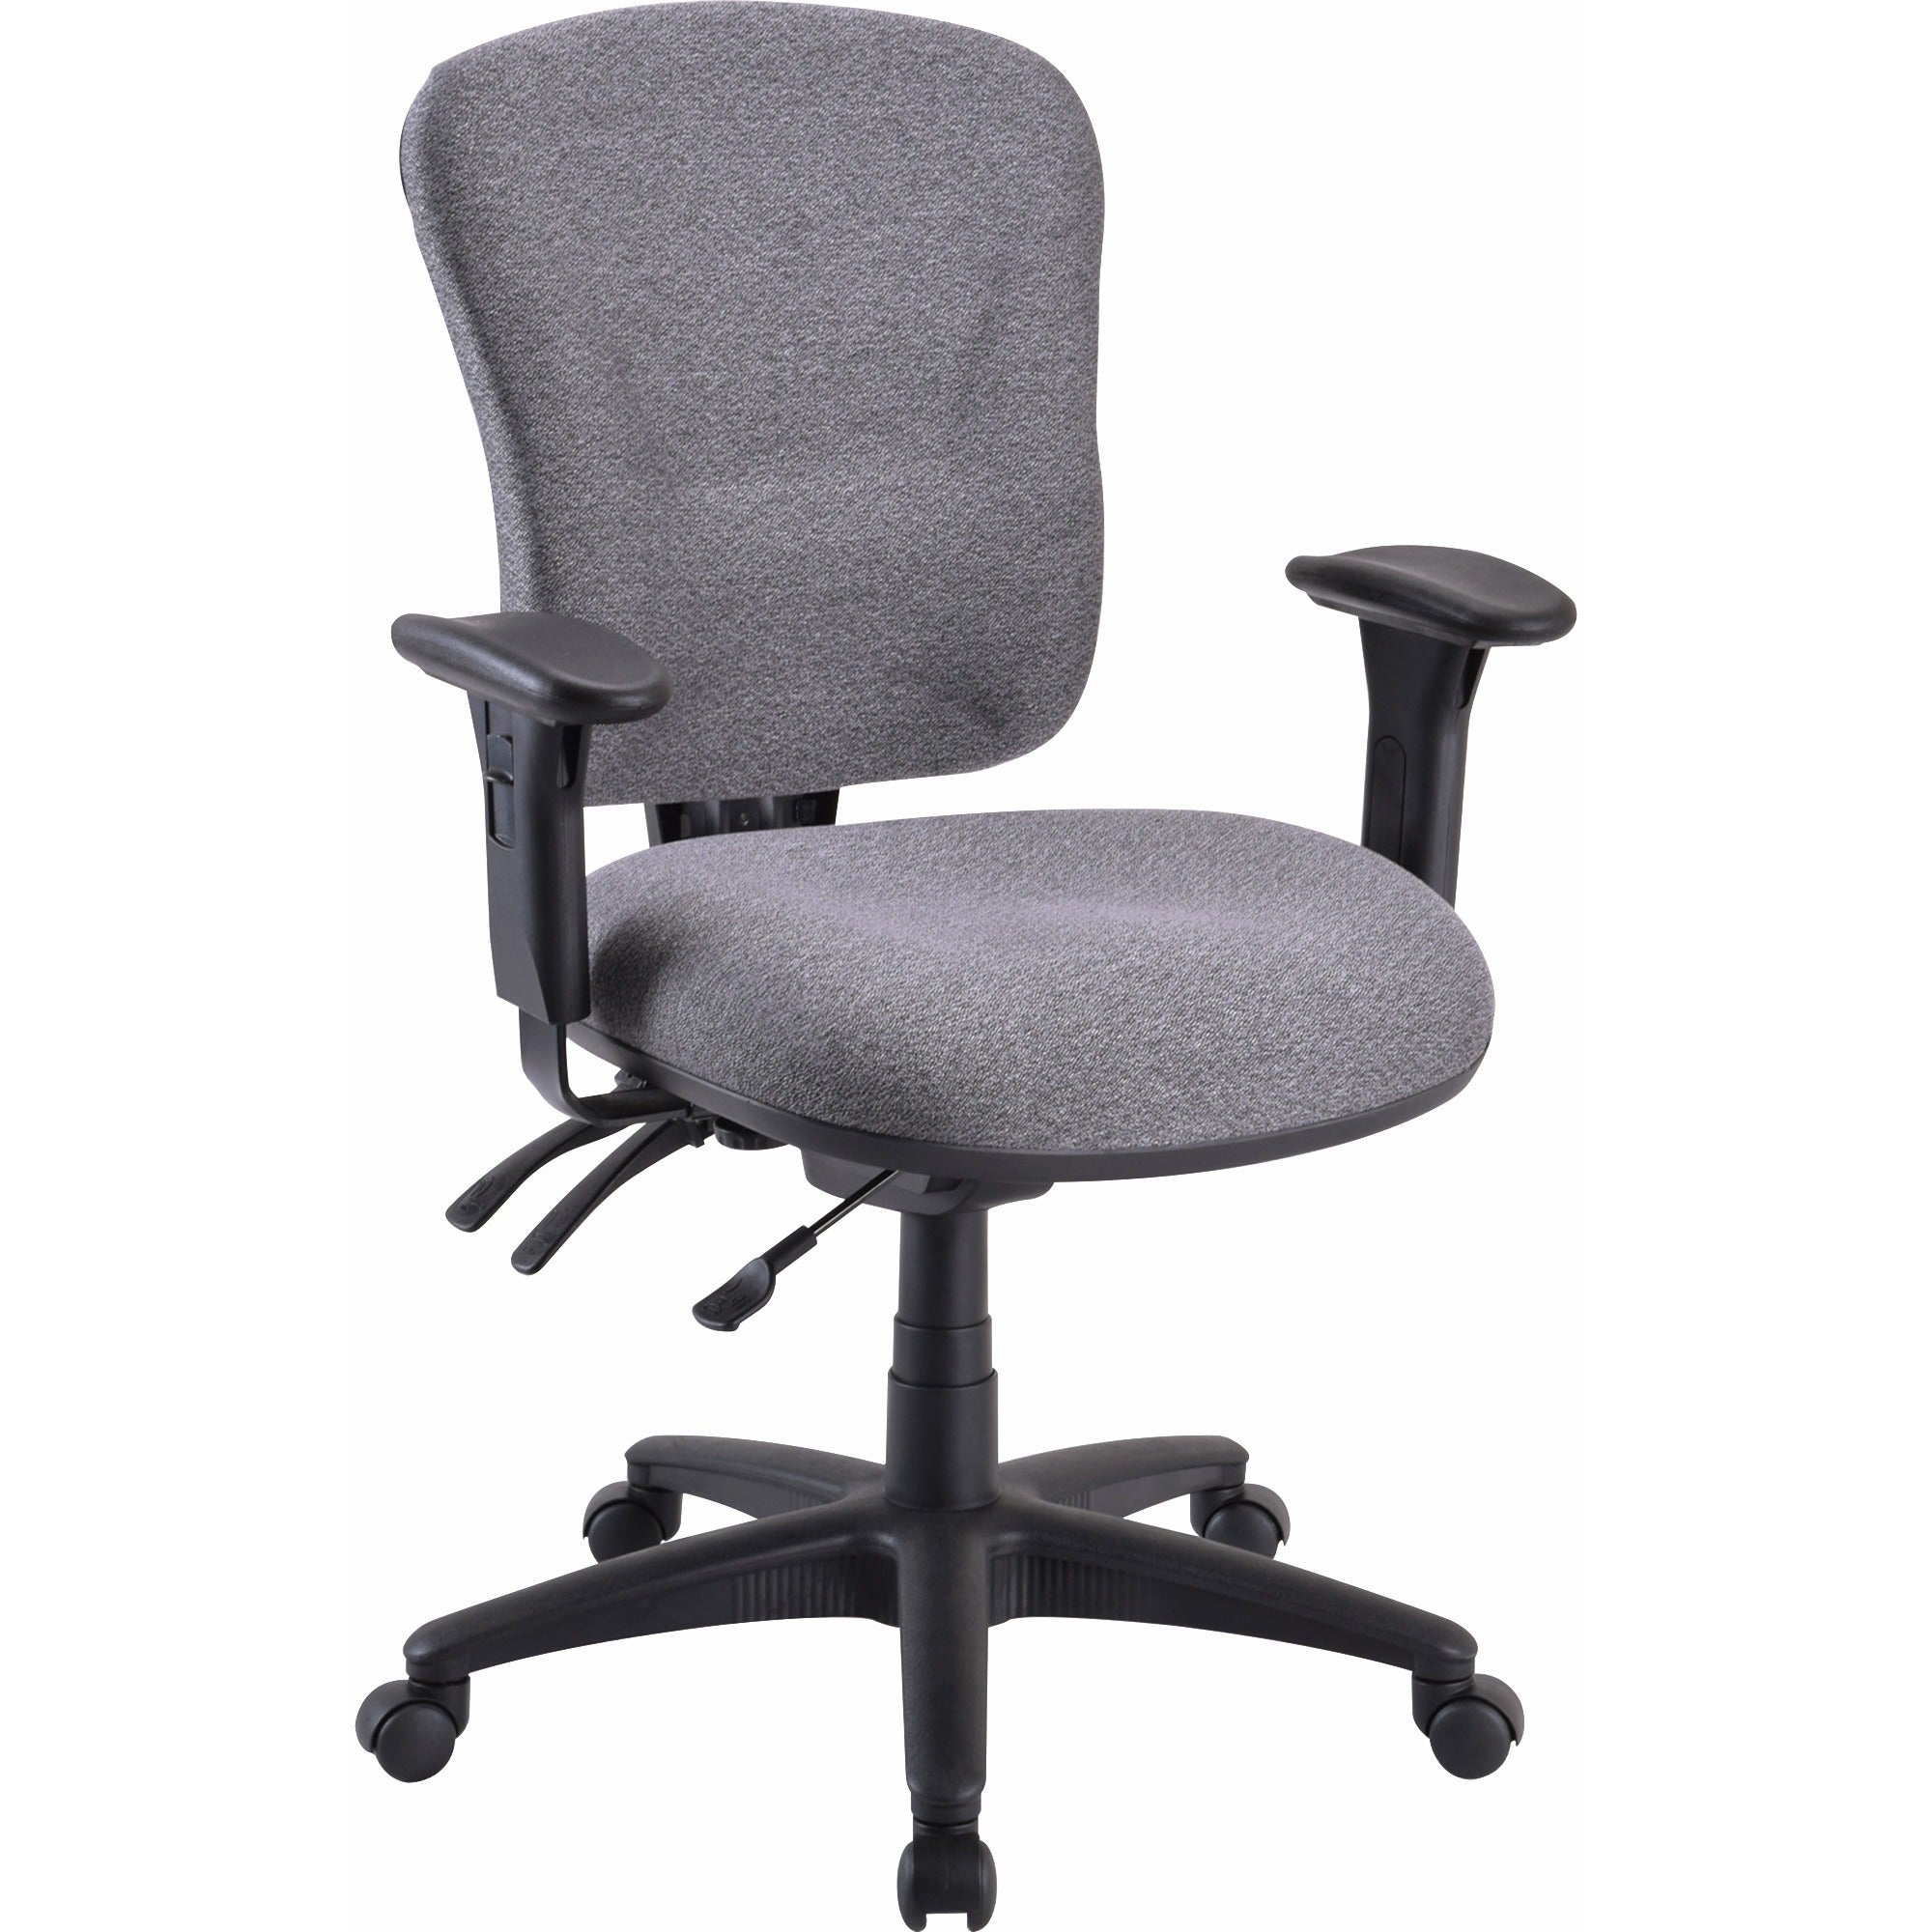 Lorell Accord Series Mid-Back Task Chair - Gray Polyester Seat - Black Frame - 1 Each - 